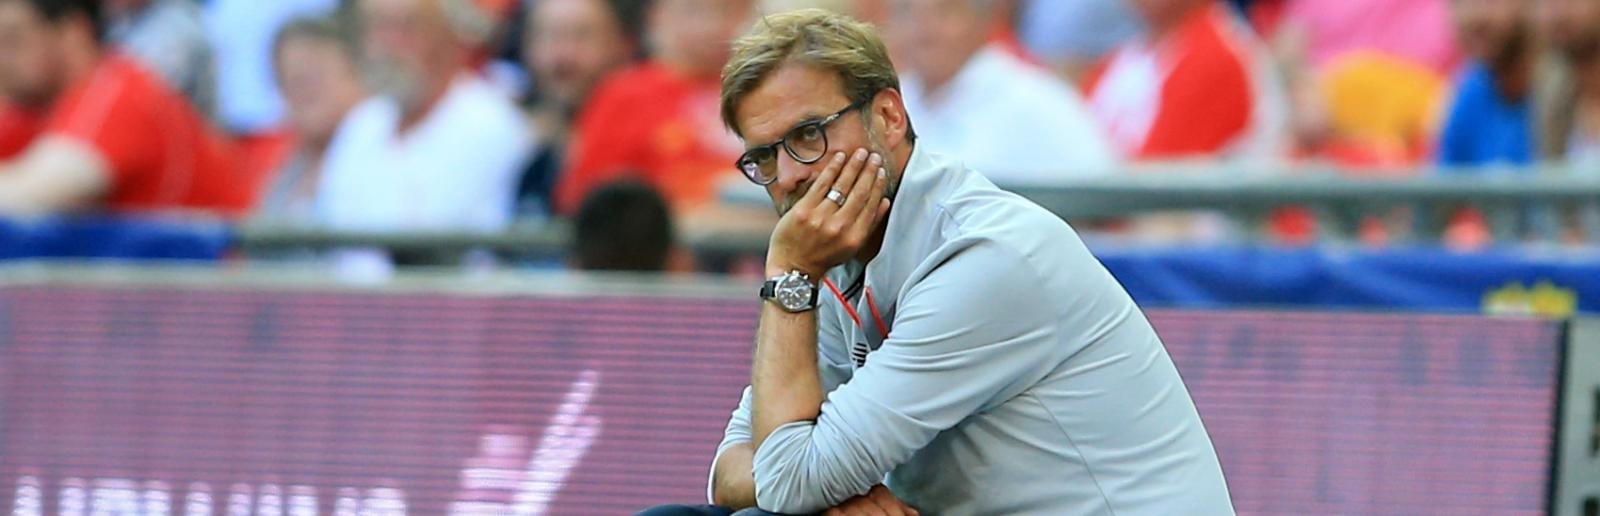 Jurgen Klopp must axe these 3 Liverpool players in January